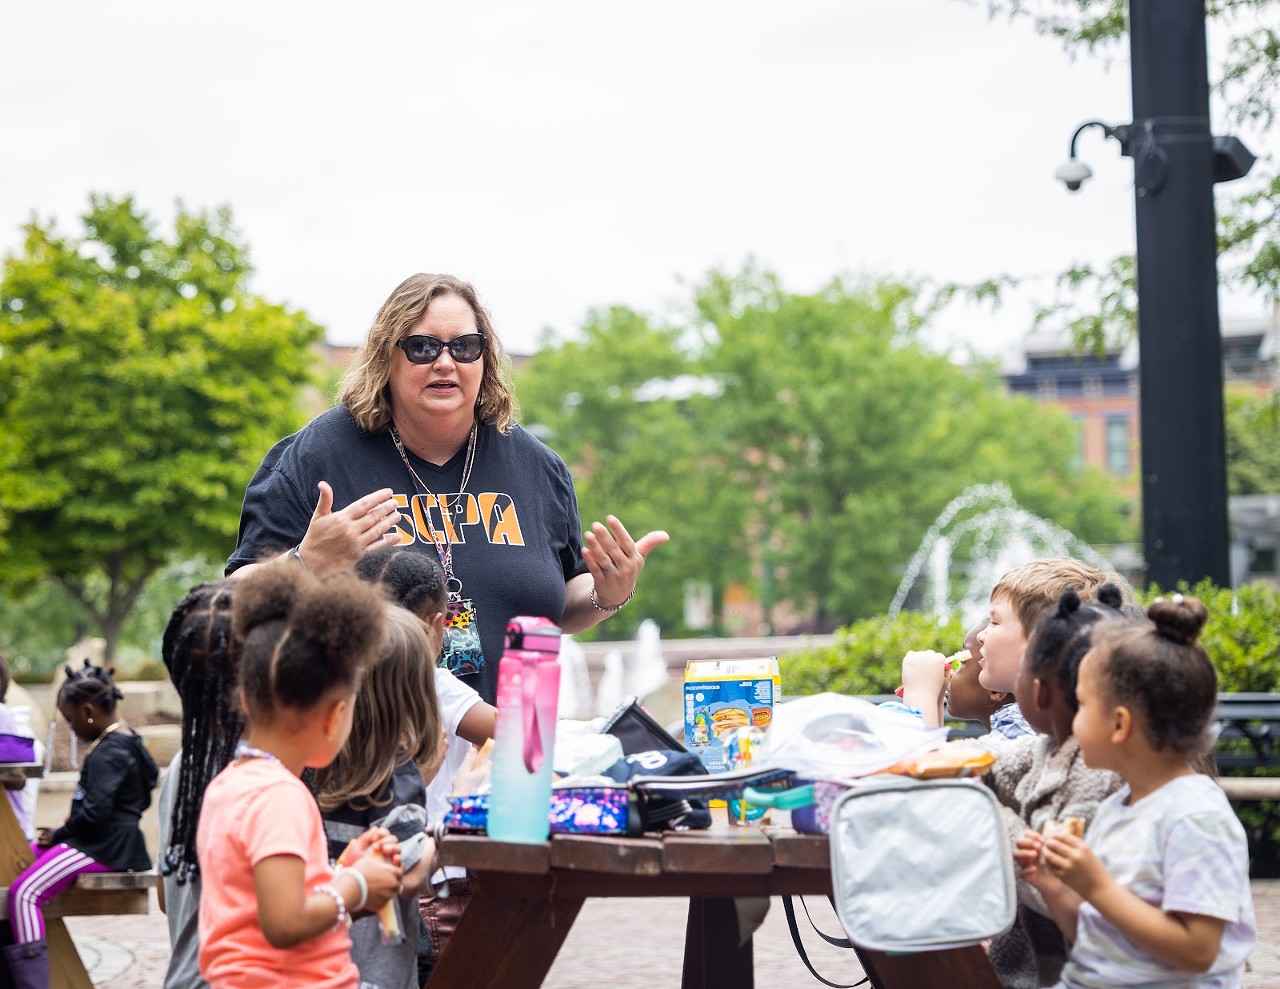 Local elementary students go to the park and eat lunch before attending a live theater performance. For the protection of the children, the teacher and school asked to remain anonymous.